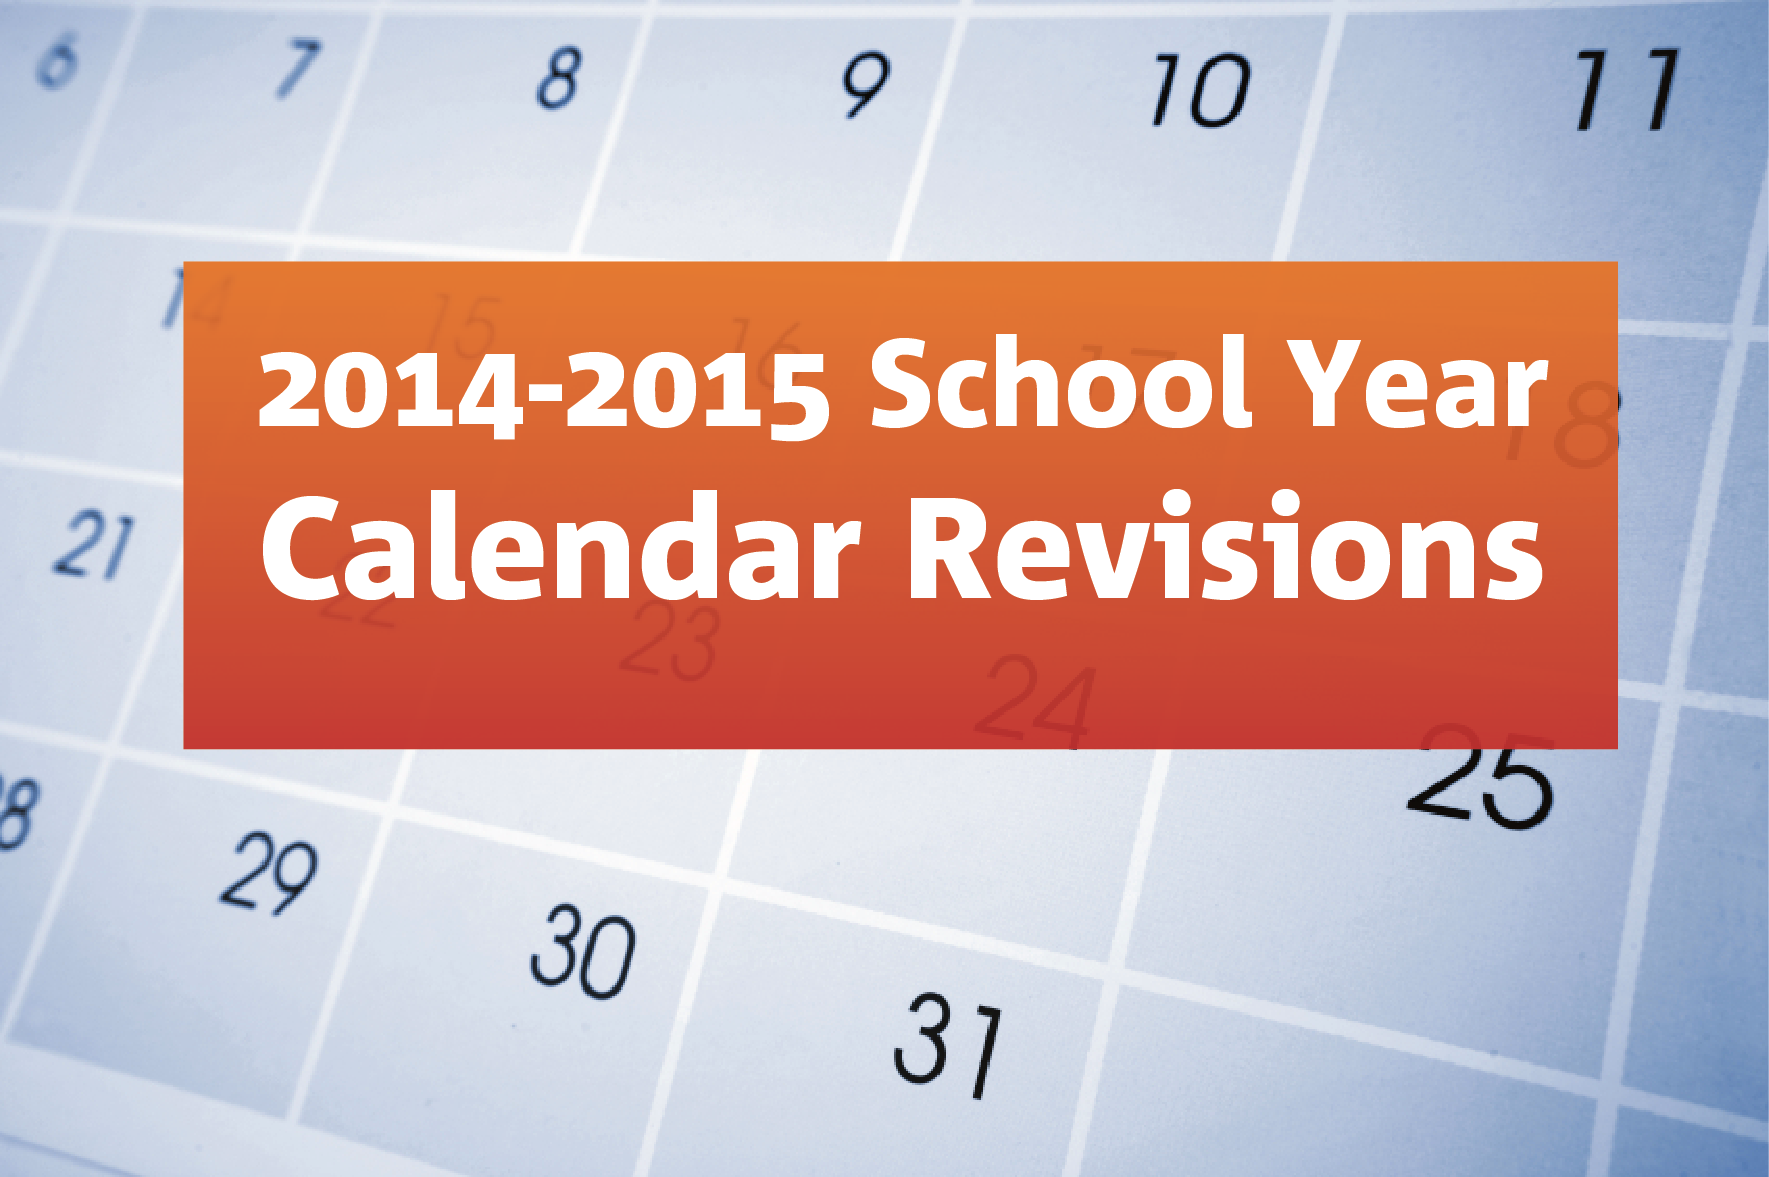 Changes to the 2014-2015 school year calendar